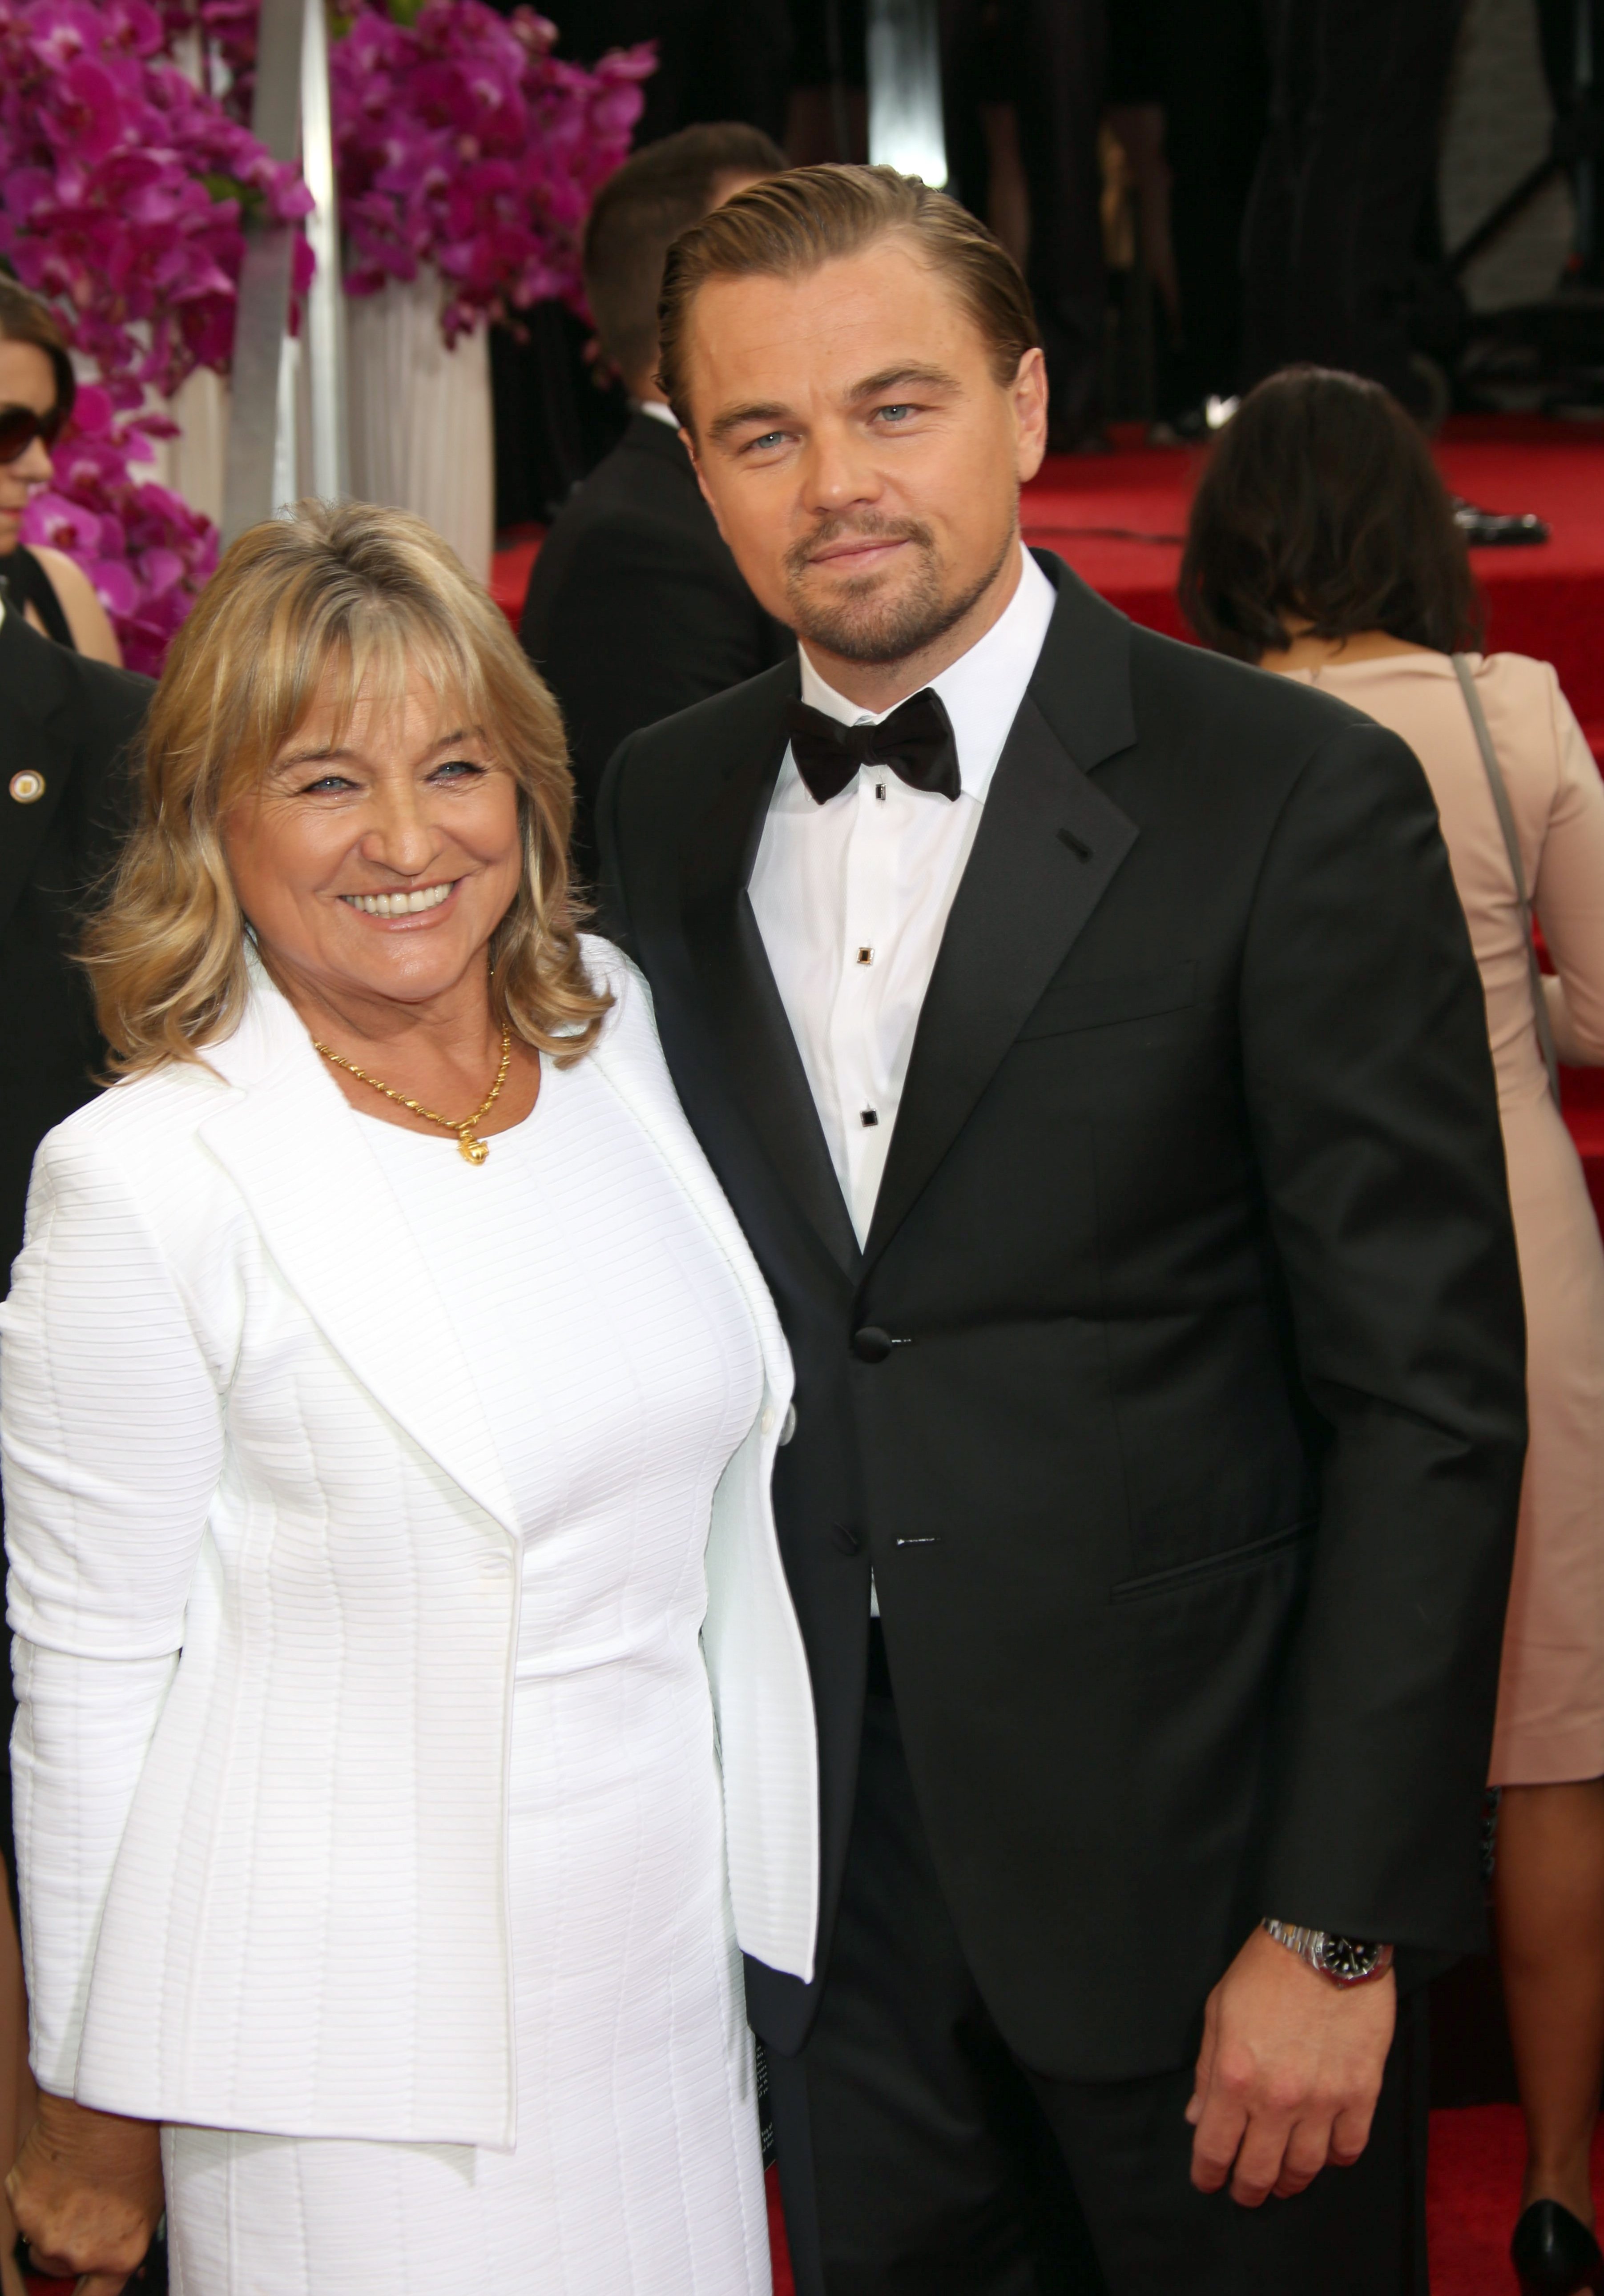 Leonardo DiCaprio and mother Irmelin Indenbirken attend the 71st Annual Golden Globe Awards aka Golden Globes at Hotel Beverly Hilton in Los Angeles, USA, on 12 January 2014 | Source: Getty Images